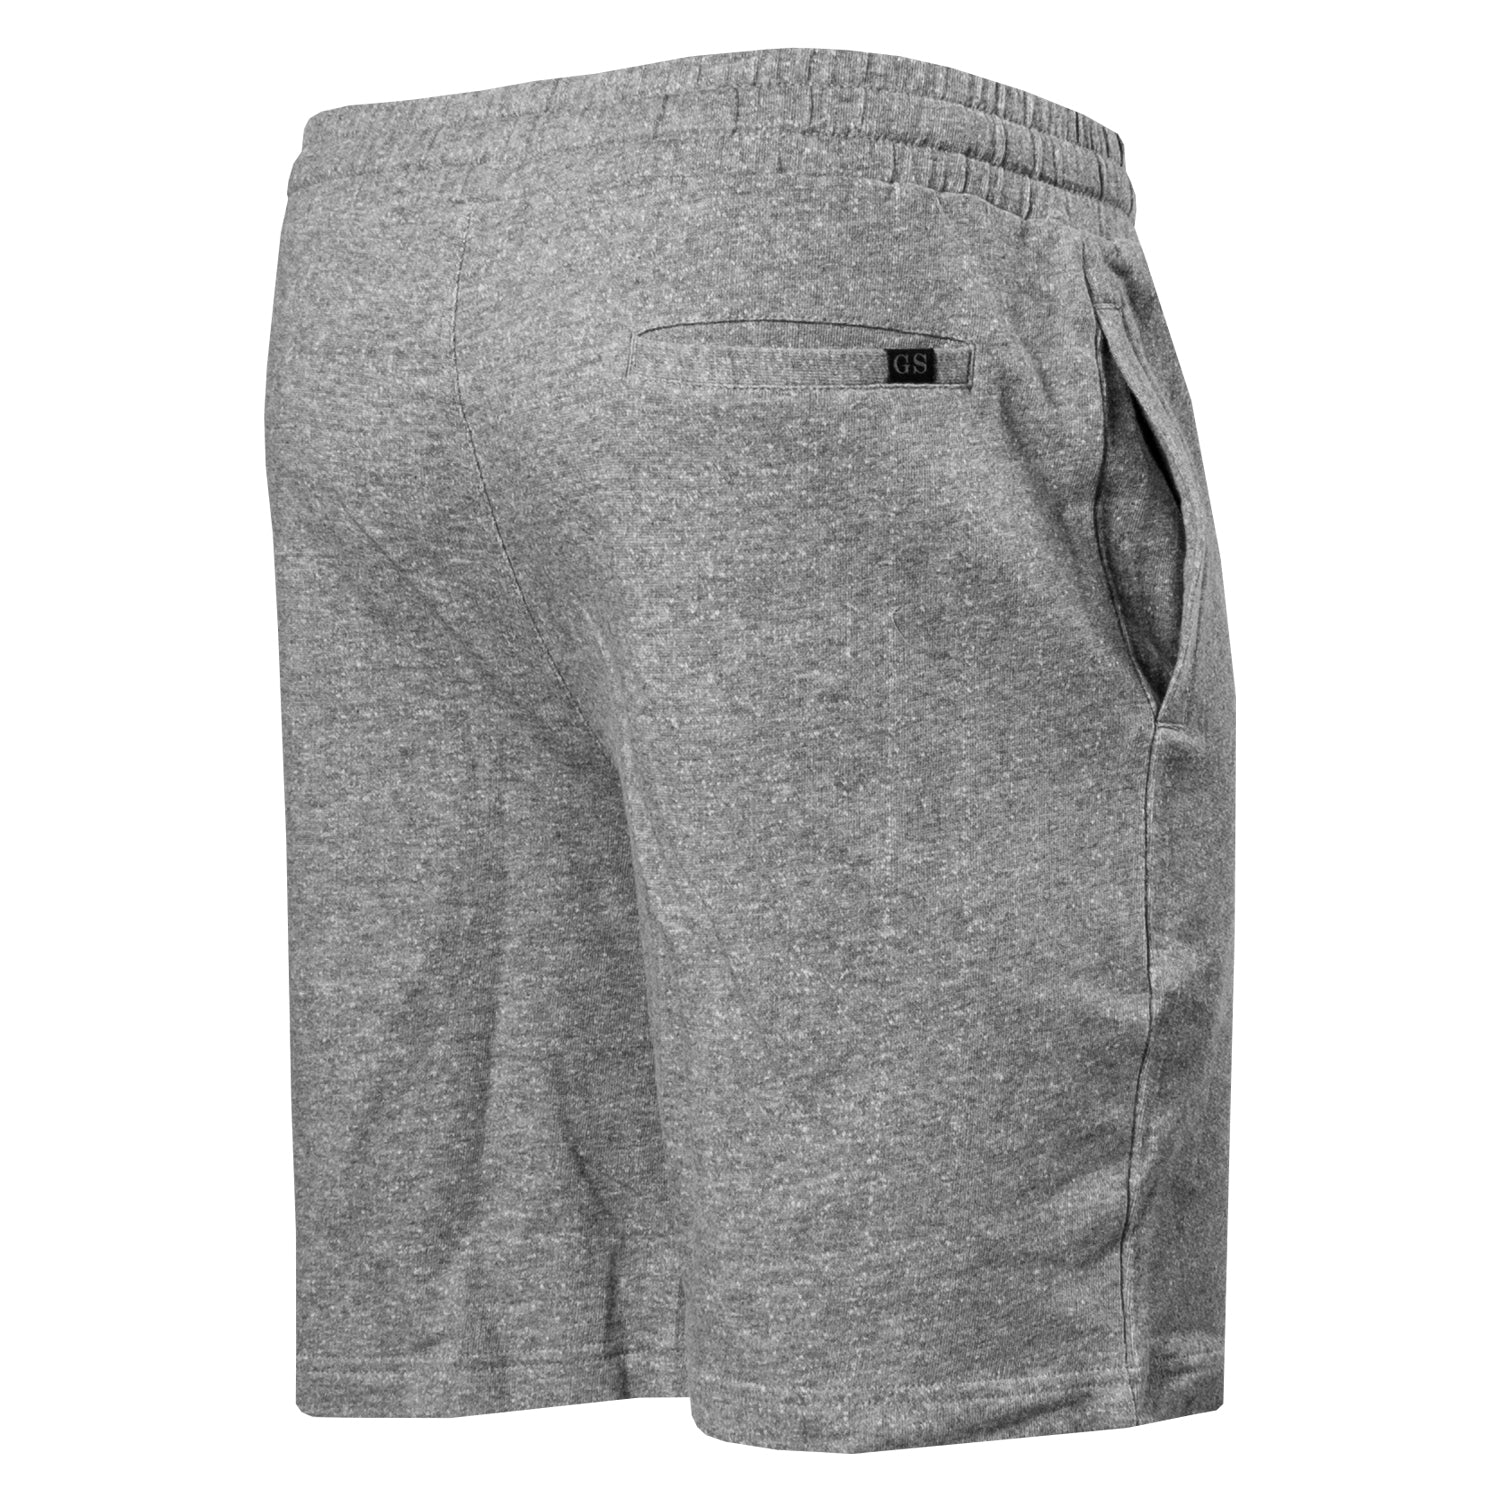 Sweat Shorts in Heather Grey for Men | Grunt Style 